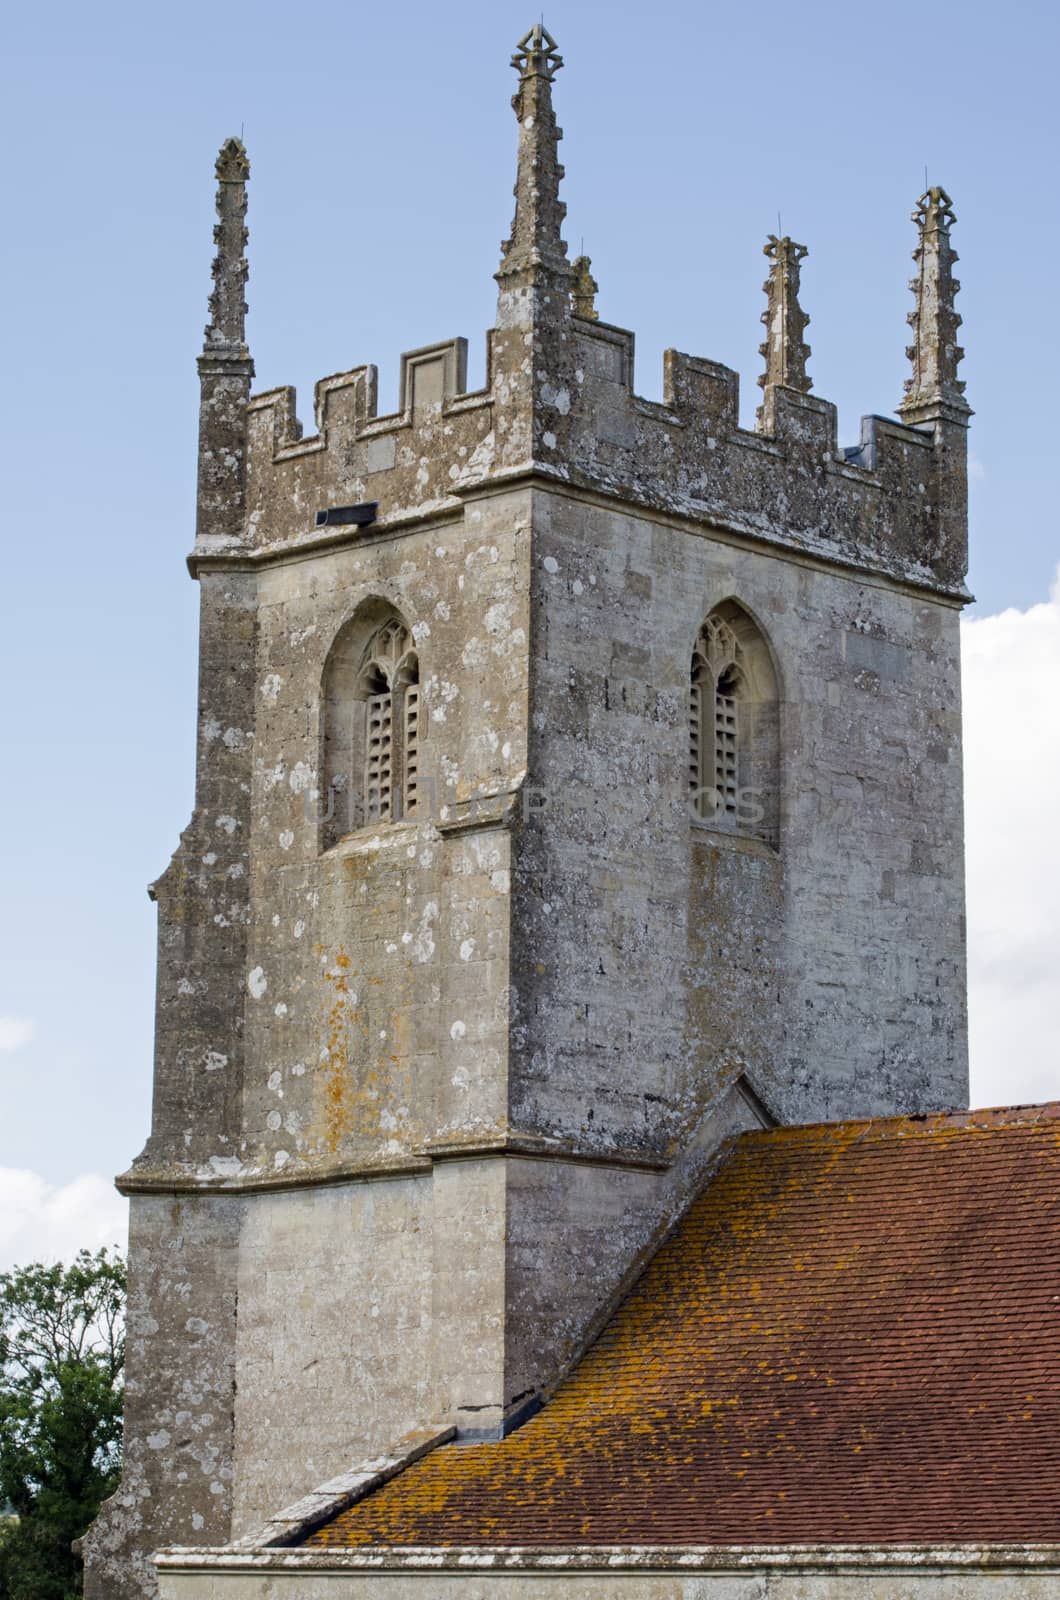 Tower of the church of Saint Giles in the village of Imber on Salisbury Plain, Wiltshire.